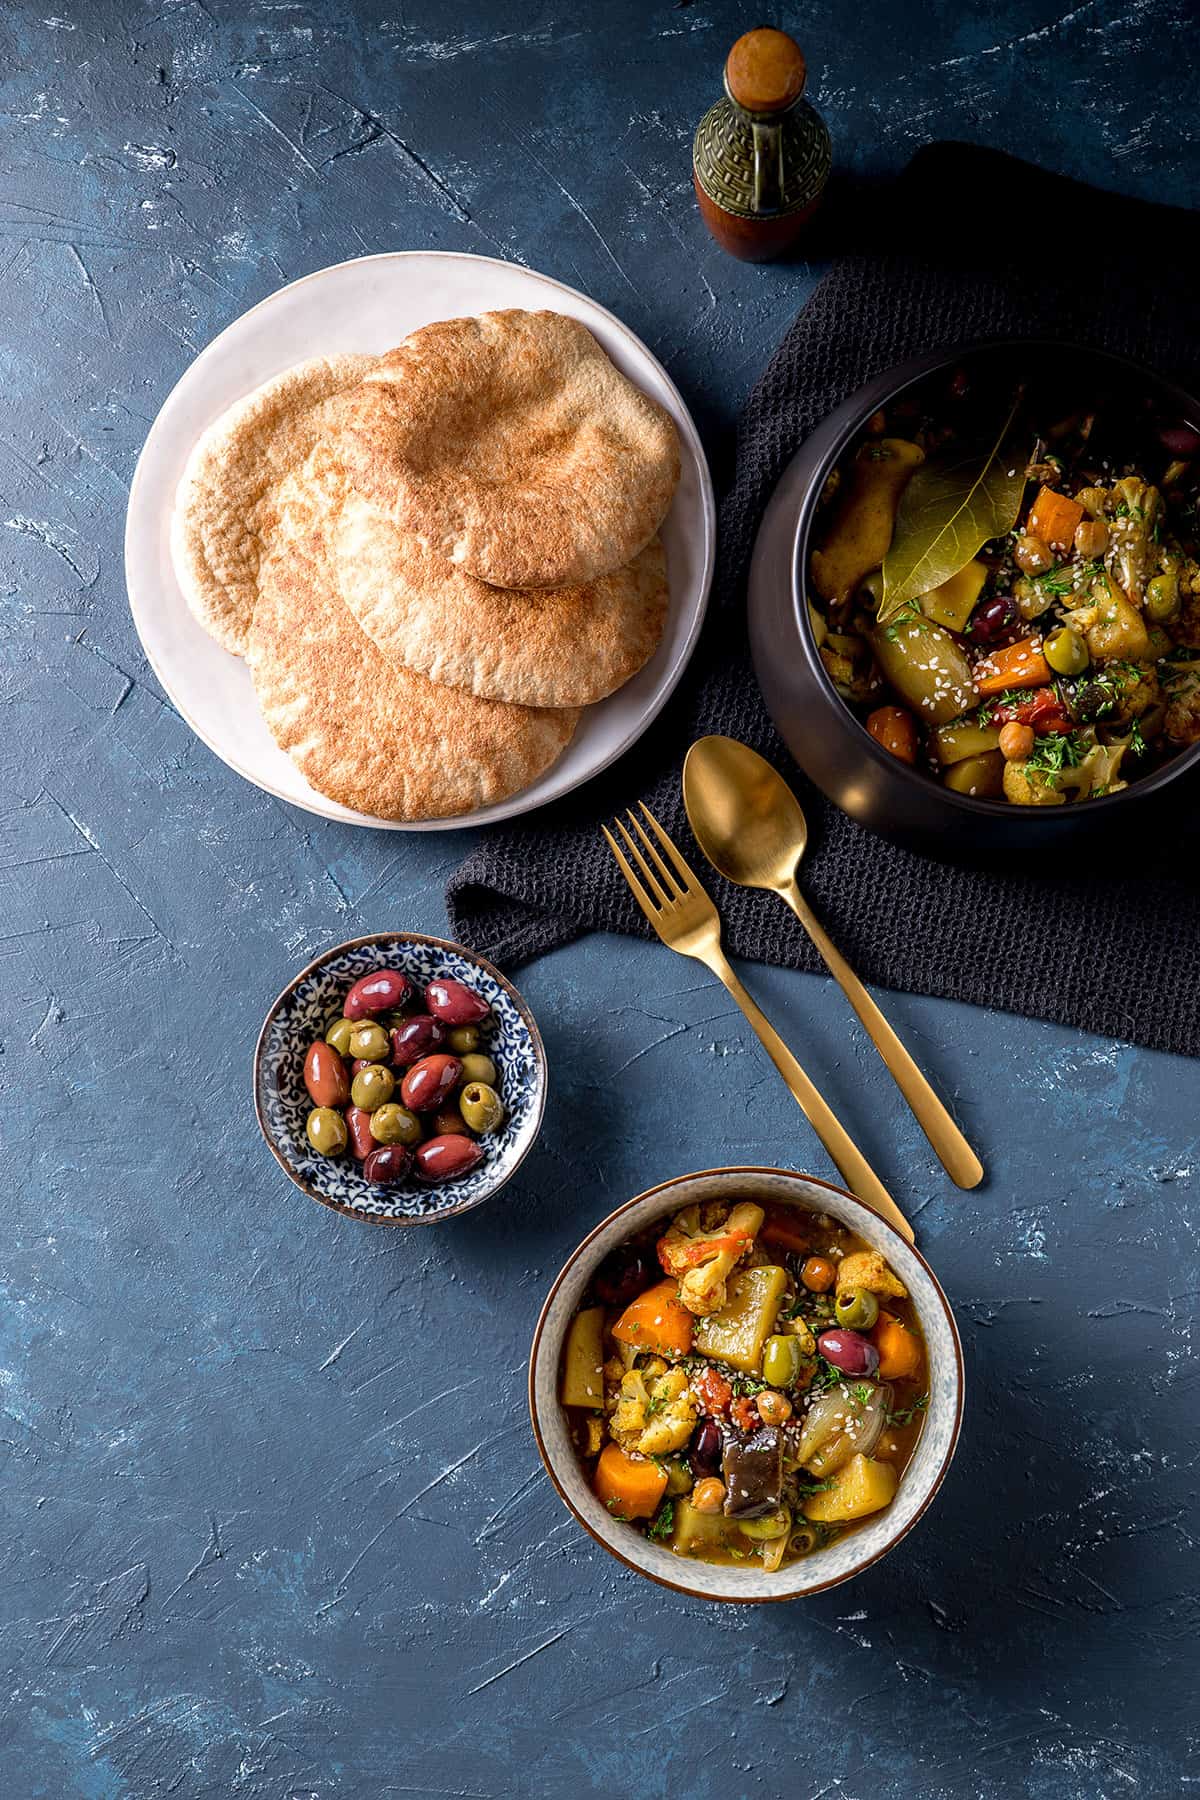 A serving bowl full of golden coloured vegetable and olive tagine, which is vegan and gluten free. Some has been served into a smaller bowl, sitting alongside a plate of flat breads.